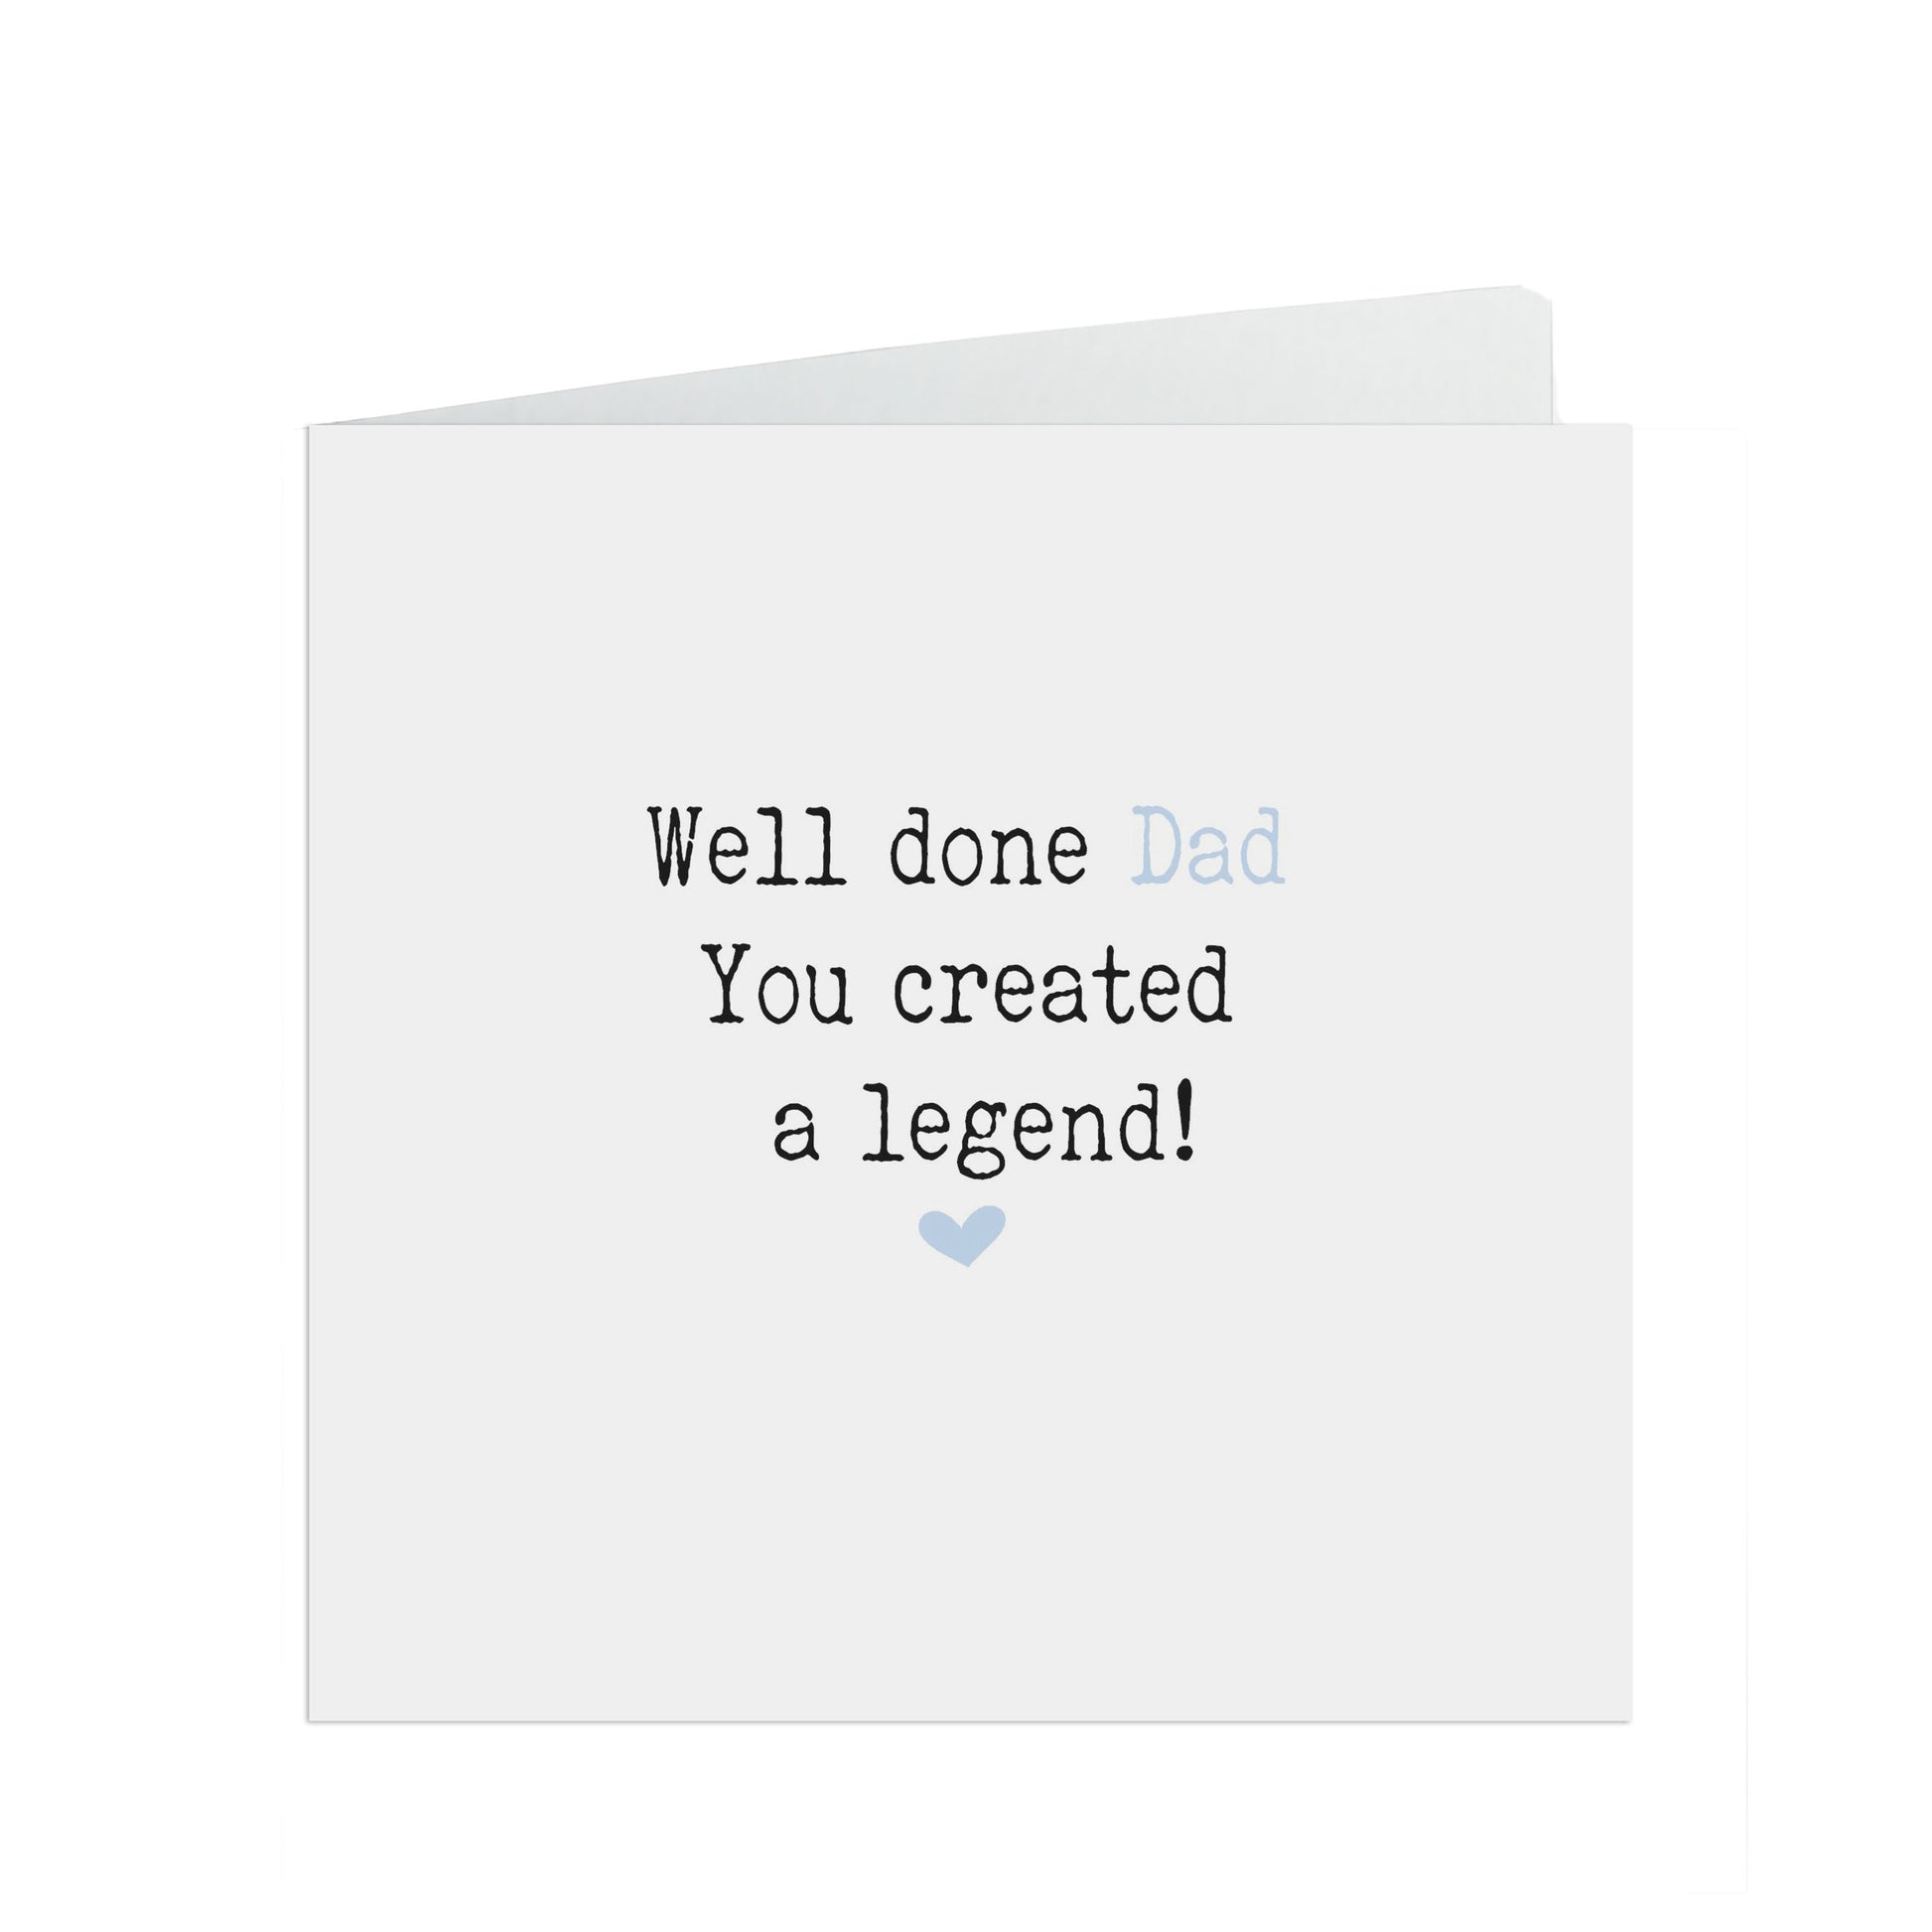  Dad You Created A Legend! Funny Father's Day Card by PMPRINTED 